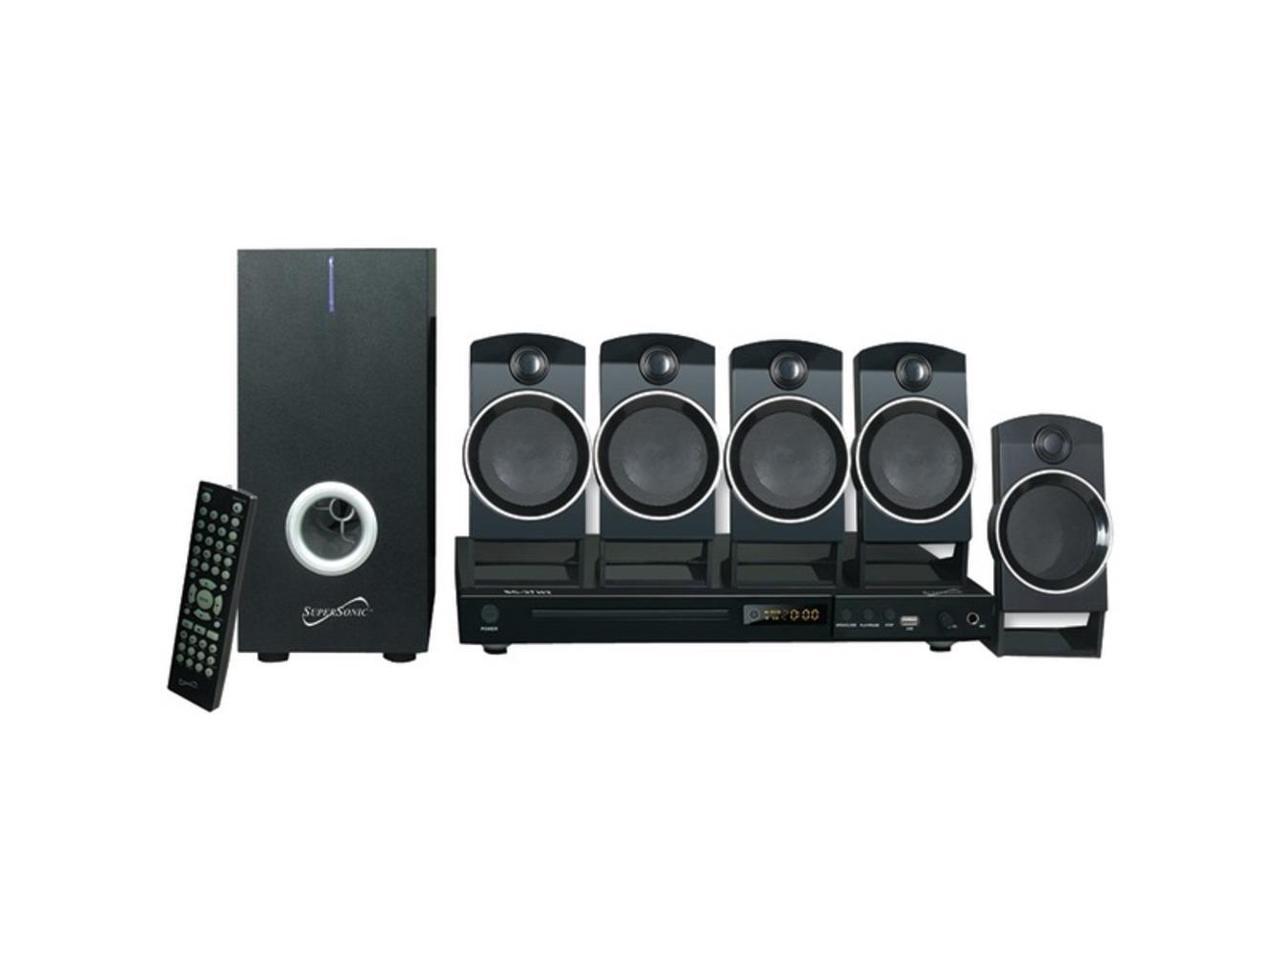 SUPERSONIC SC-37HT 5.1 Channel Dvd Home Theater System With USB Input & Karaoke Function - image 5 of 13